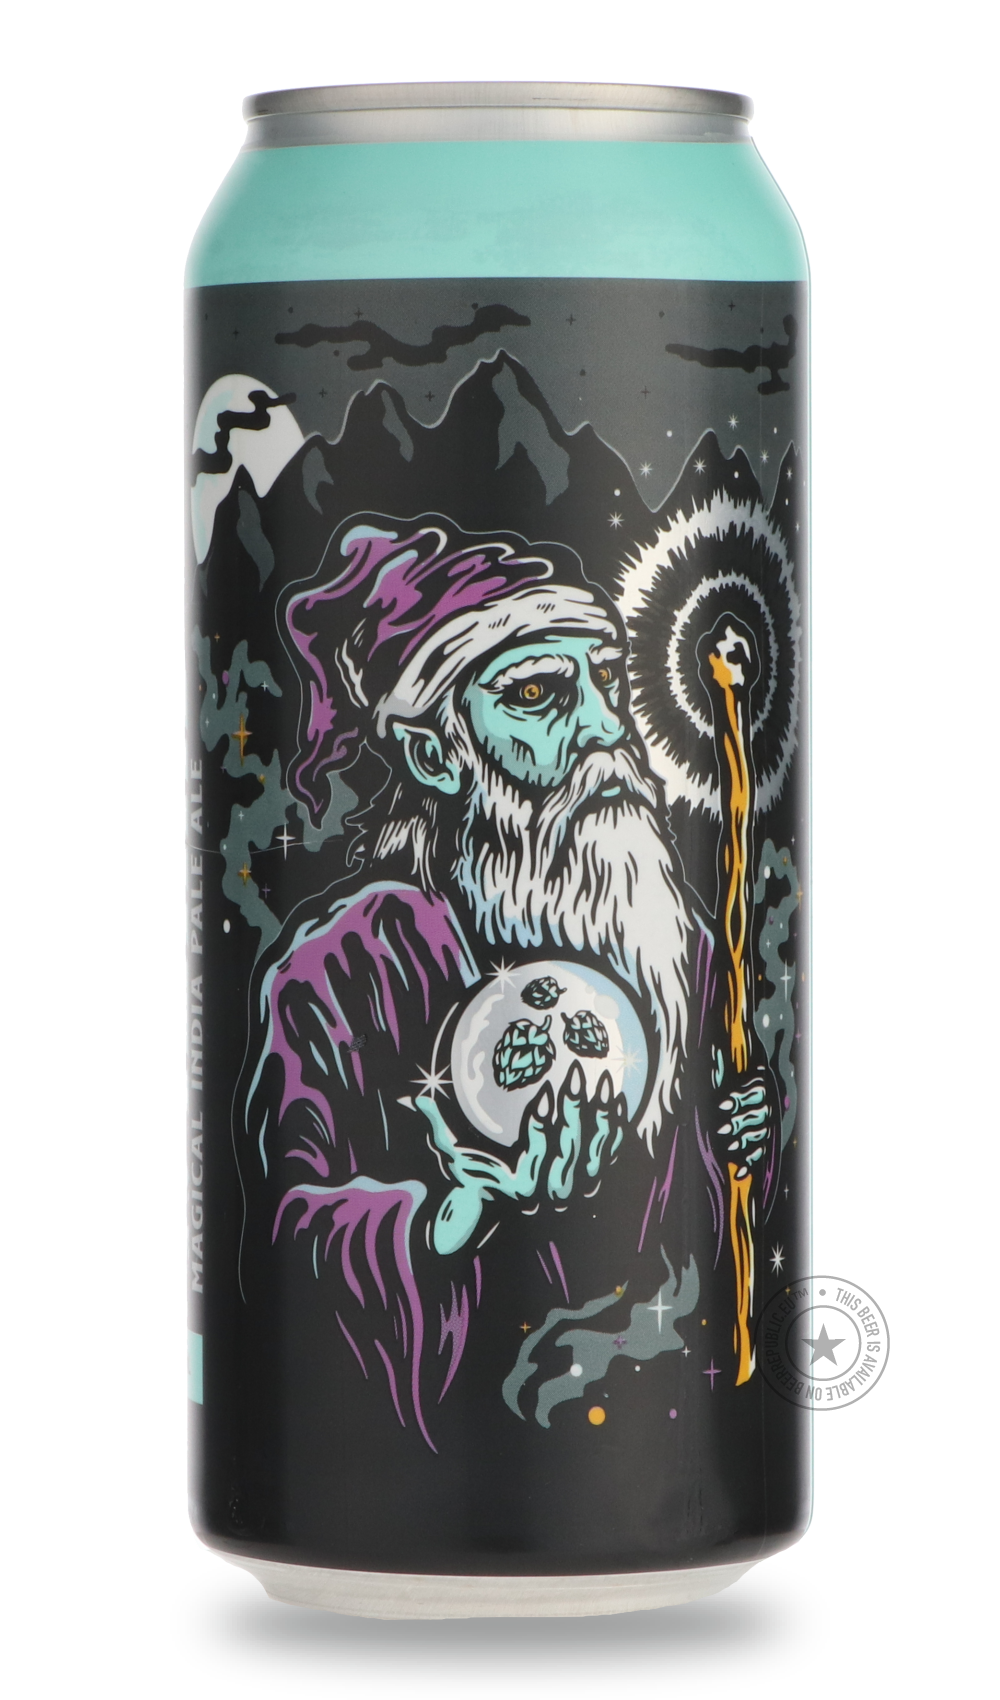 -Nickel Brook- Winter Wizard-IPA- Only @ Beer Republic - The best online beer store for American & Canadian craft beer - Buy beer online from the USA and Canada - Bier online kopen - Amerikaans bier kopen - Craft beer store - Craft beer kopen - Amerikanisch bier kaufen - Bier online kaufen - Acheter biere online - IPA - Stout - Porter - New England IPA - Hazy IPA - Imperial Stout - Barrel Aged - Barrel Aged Imperial Stout - Brown - Dark beer - Blond - Blonde - Pilsner - Lager - Wheat - Weizen - Amber - Barl